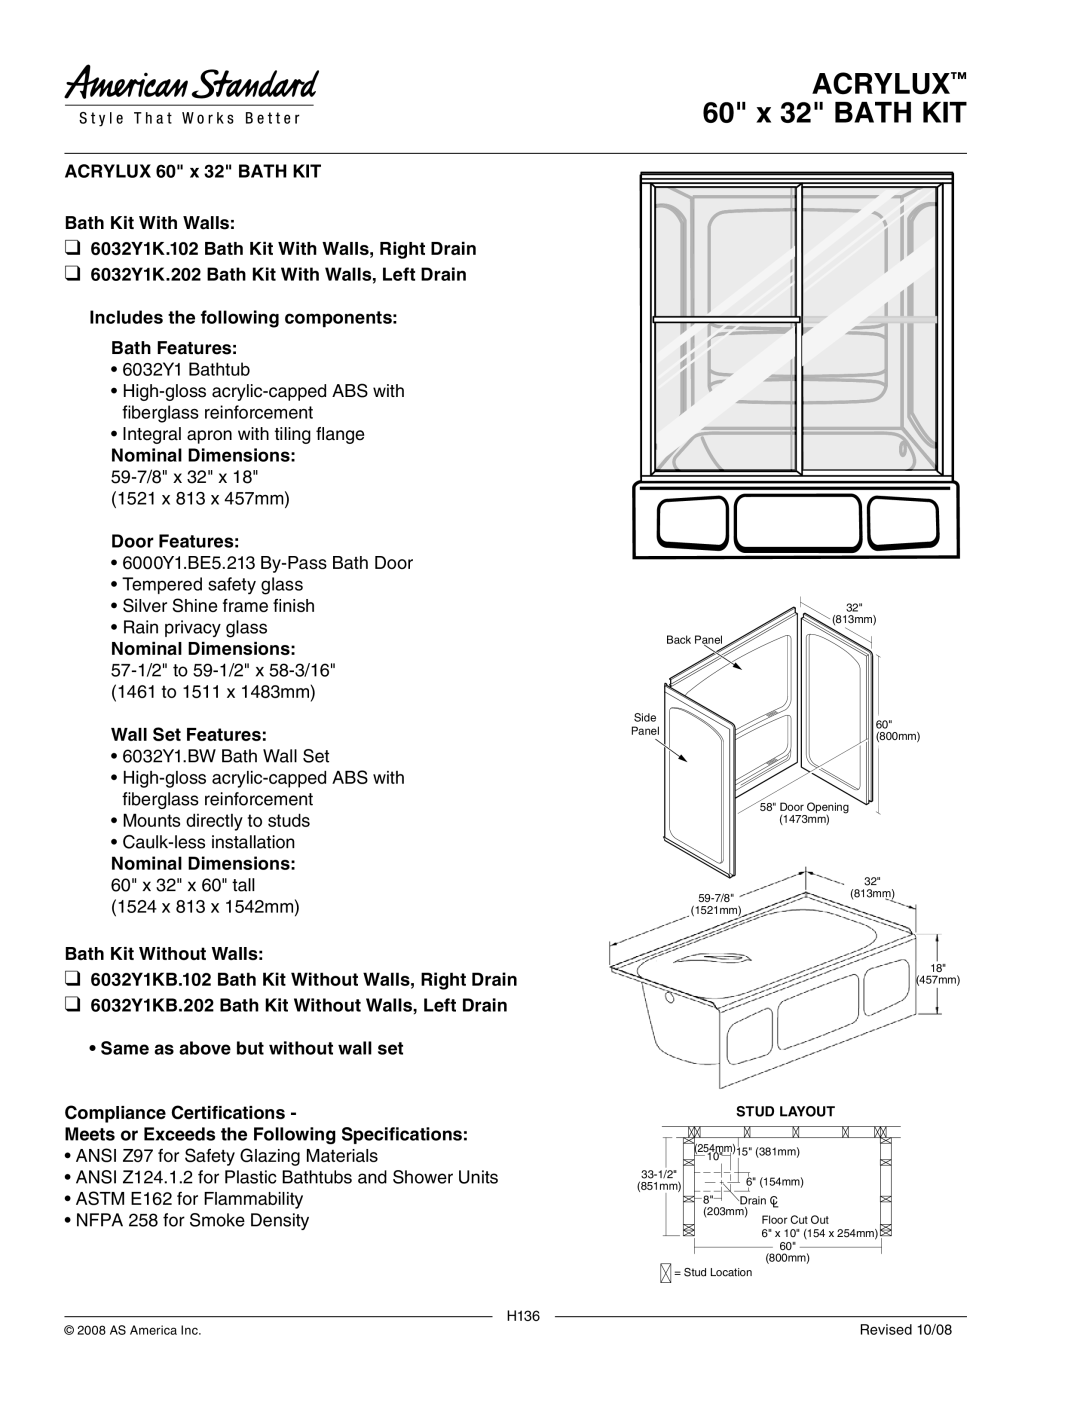 American Standard 6032Y1K.102 dimensions Acrylux 60 x 32 Bath KIT, Nominal Dimensions, Wall Set Features, H136 